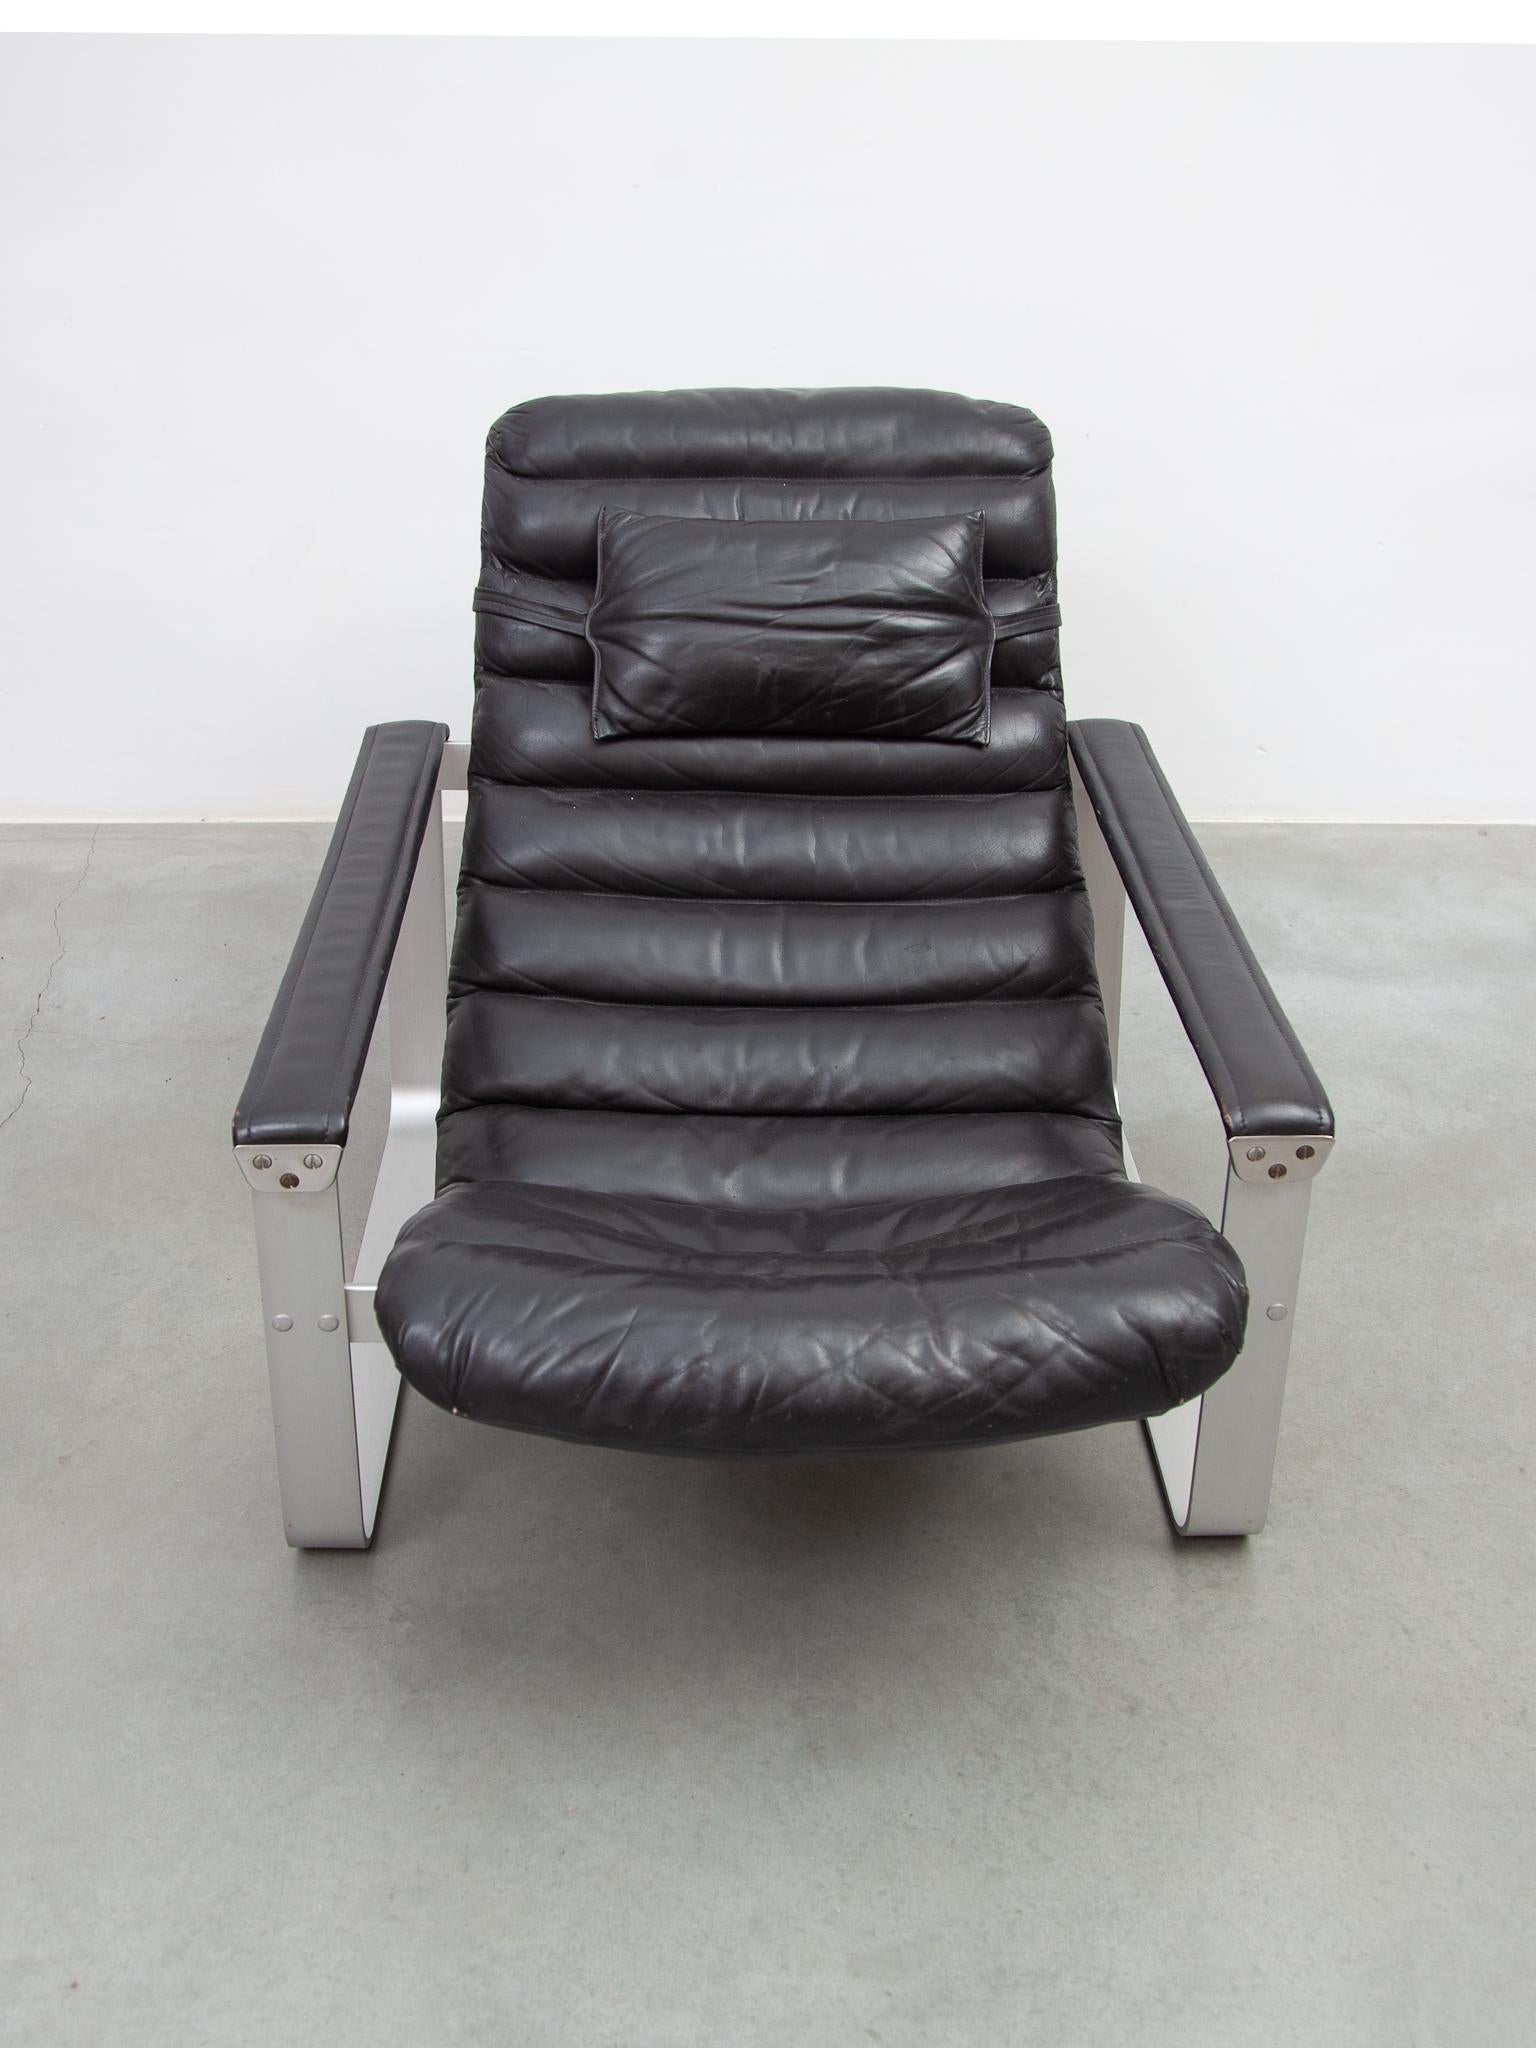 Pulkka Lounge Chair designed by Ilmari Lappalainen by ASKO, Finland, 1968 For Sale 2